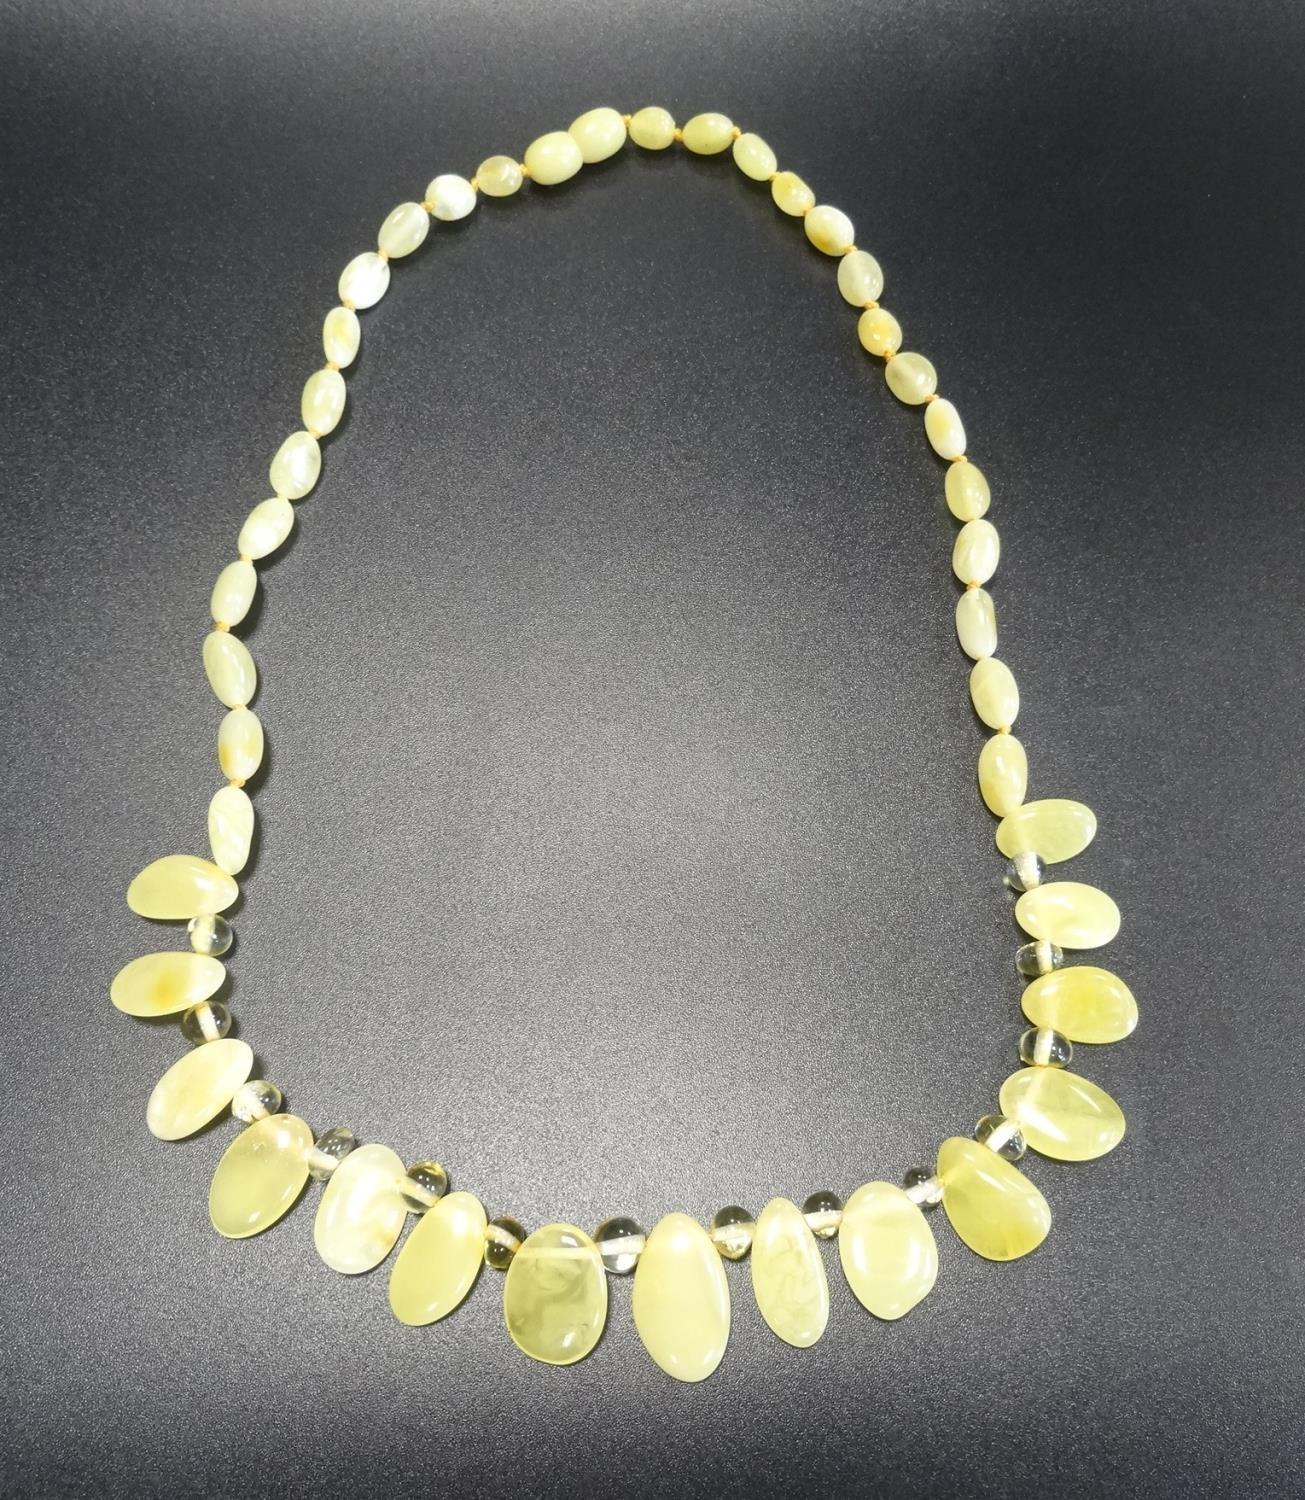 MODERN YELLOW AMBER BEAD NECKLACE approximately 47.5cm long